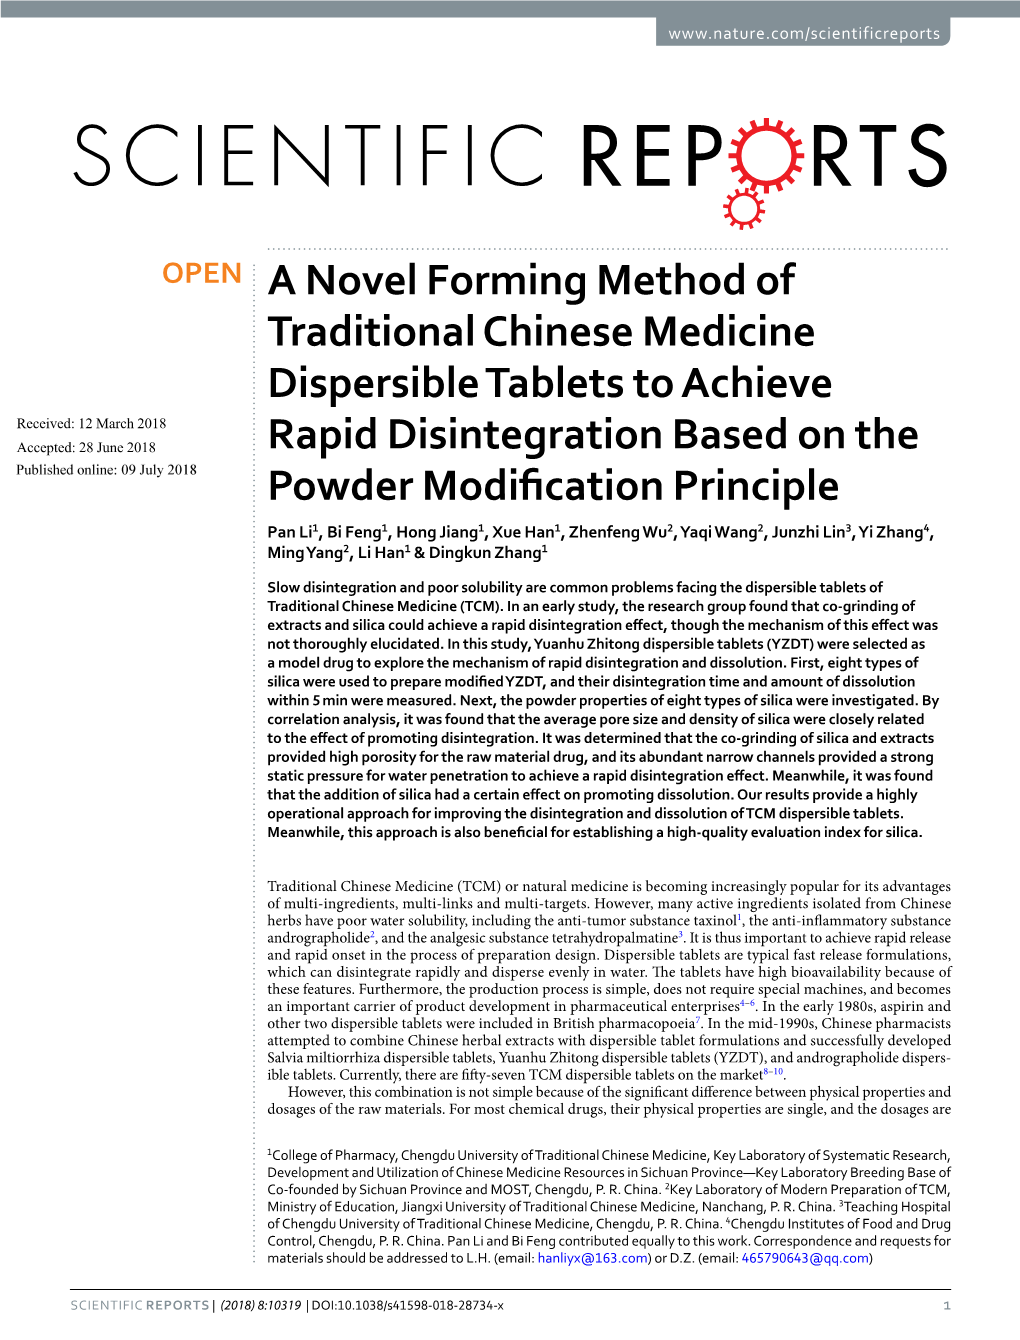 A Novel Forming Method of Traditional Chinese Medicine Dispersible